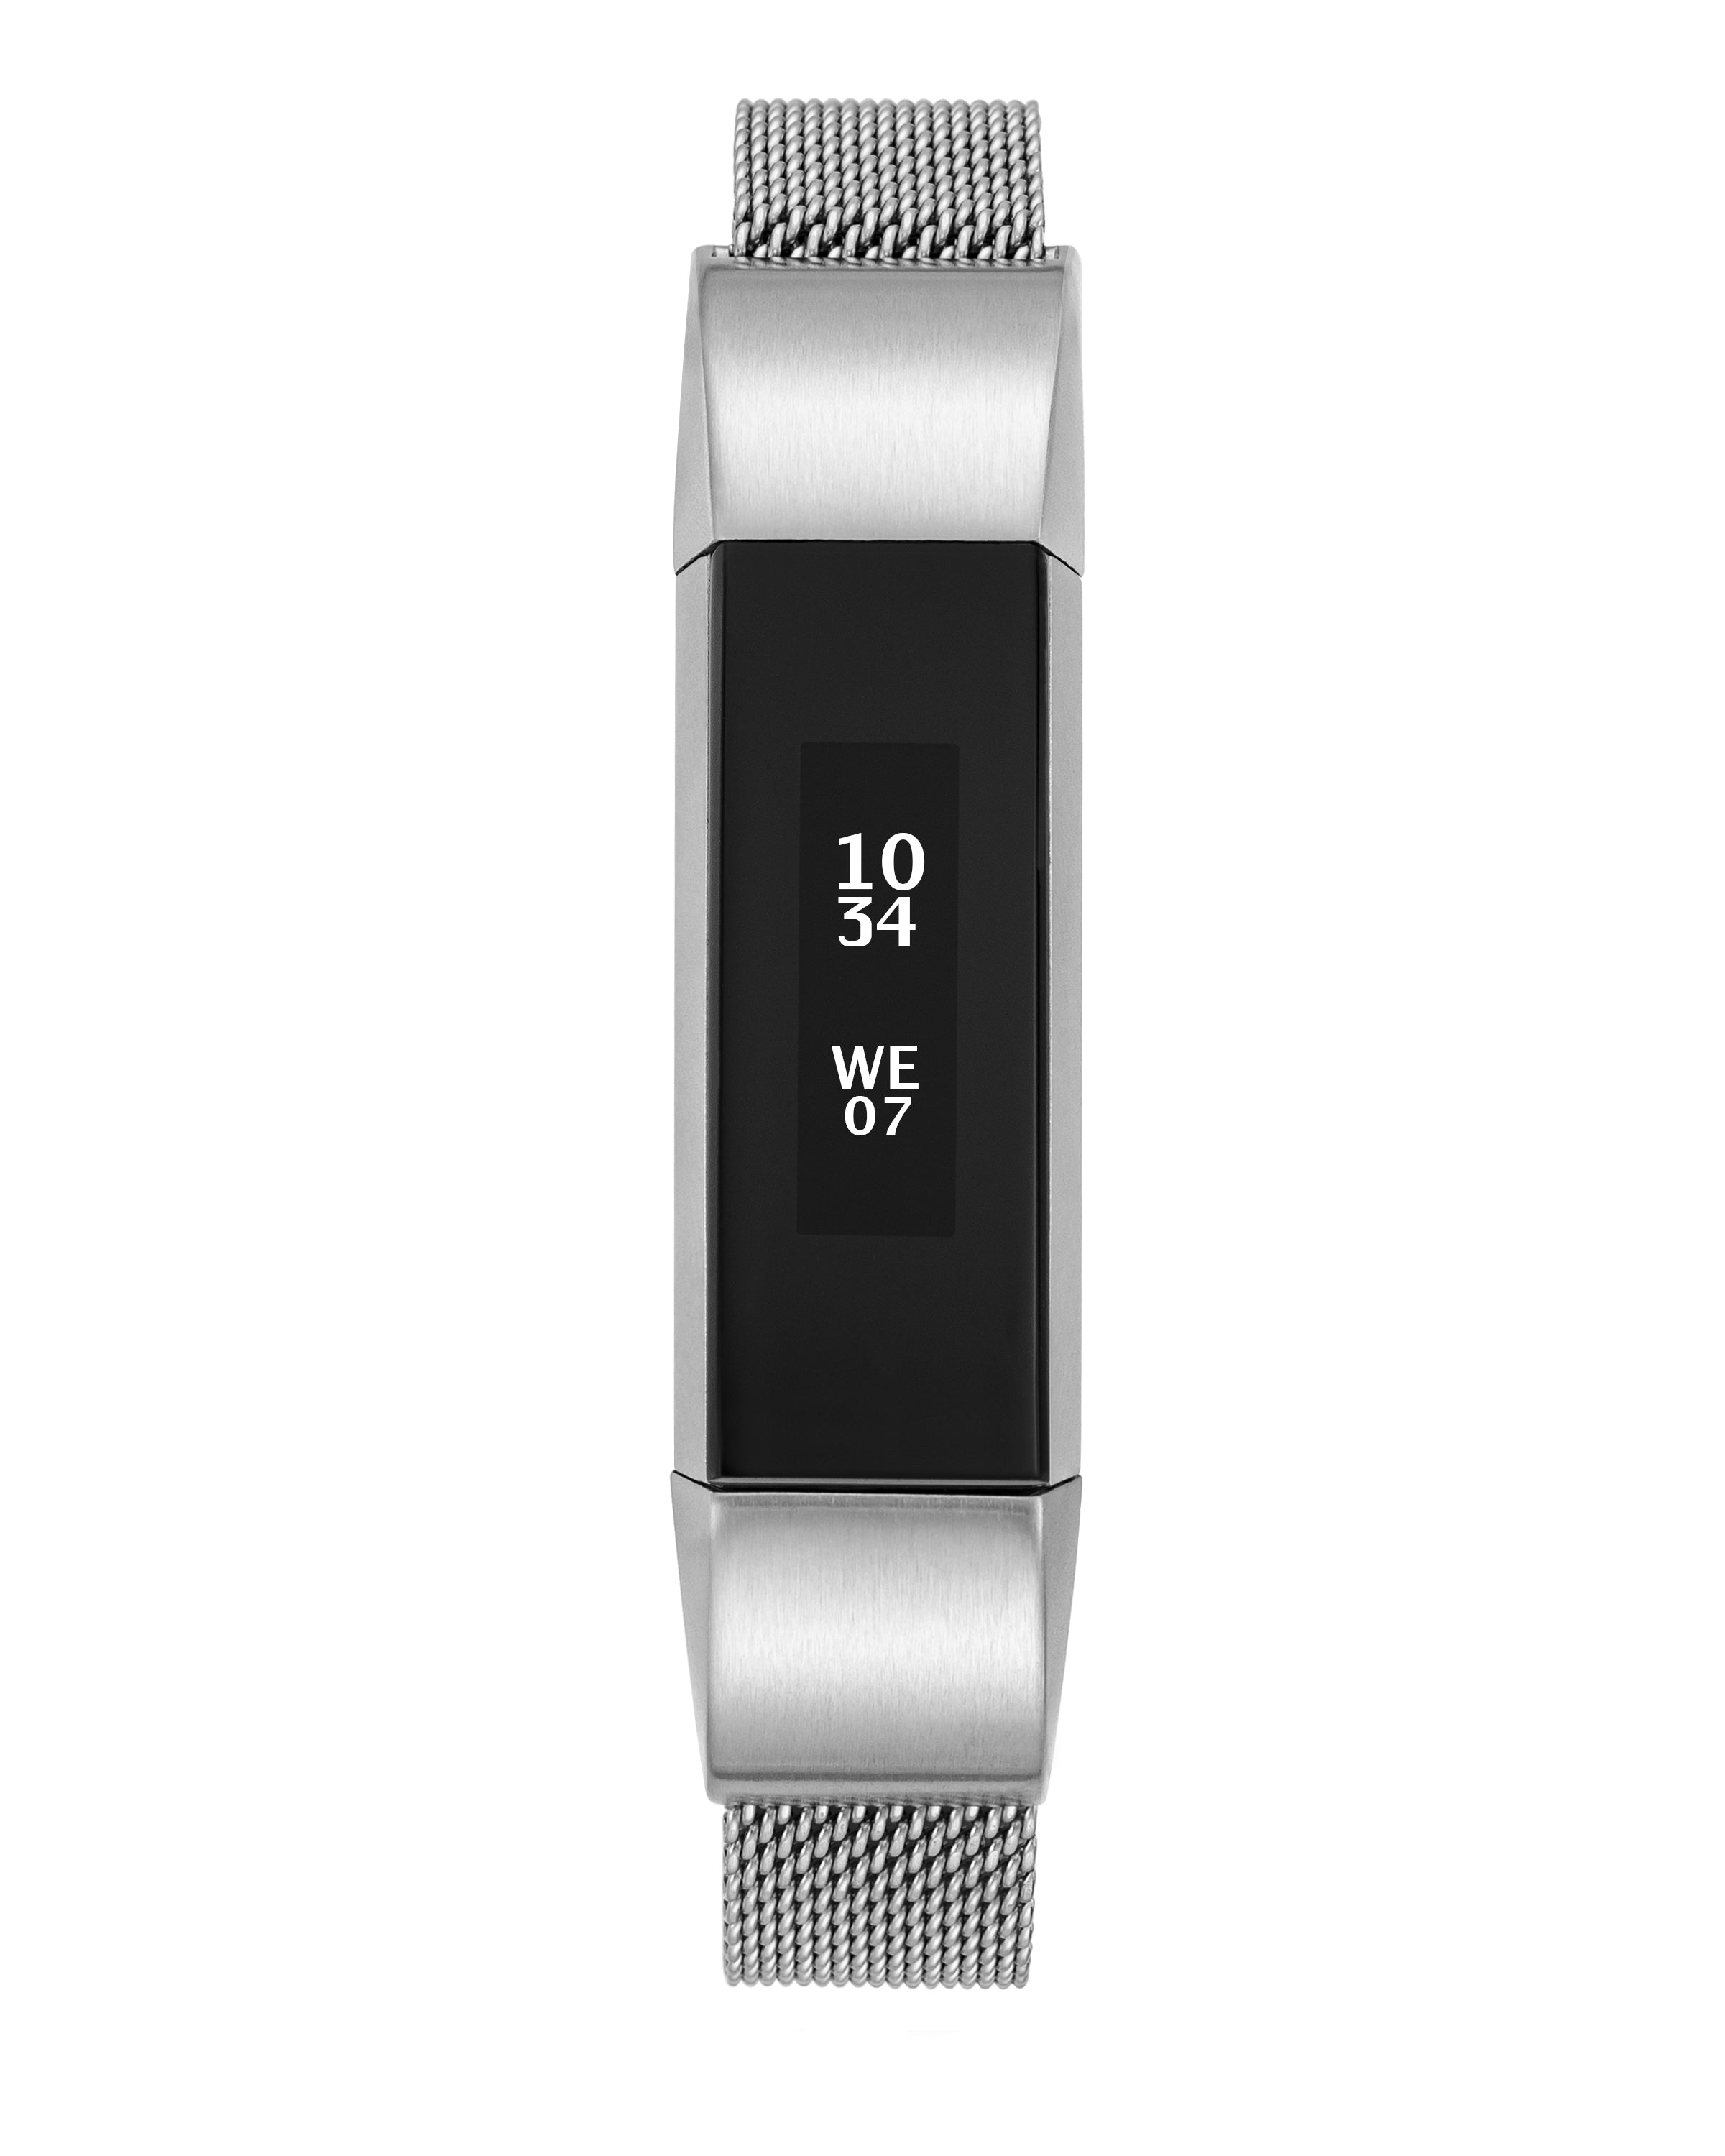 Mesh Band for Fitbit Alta